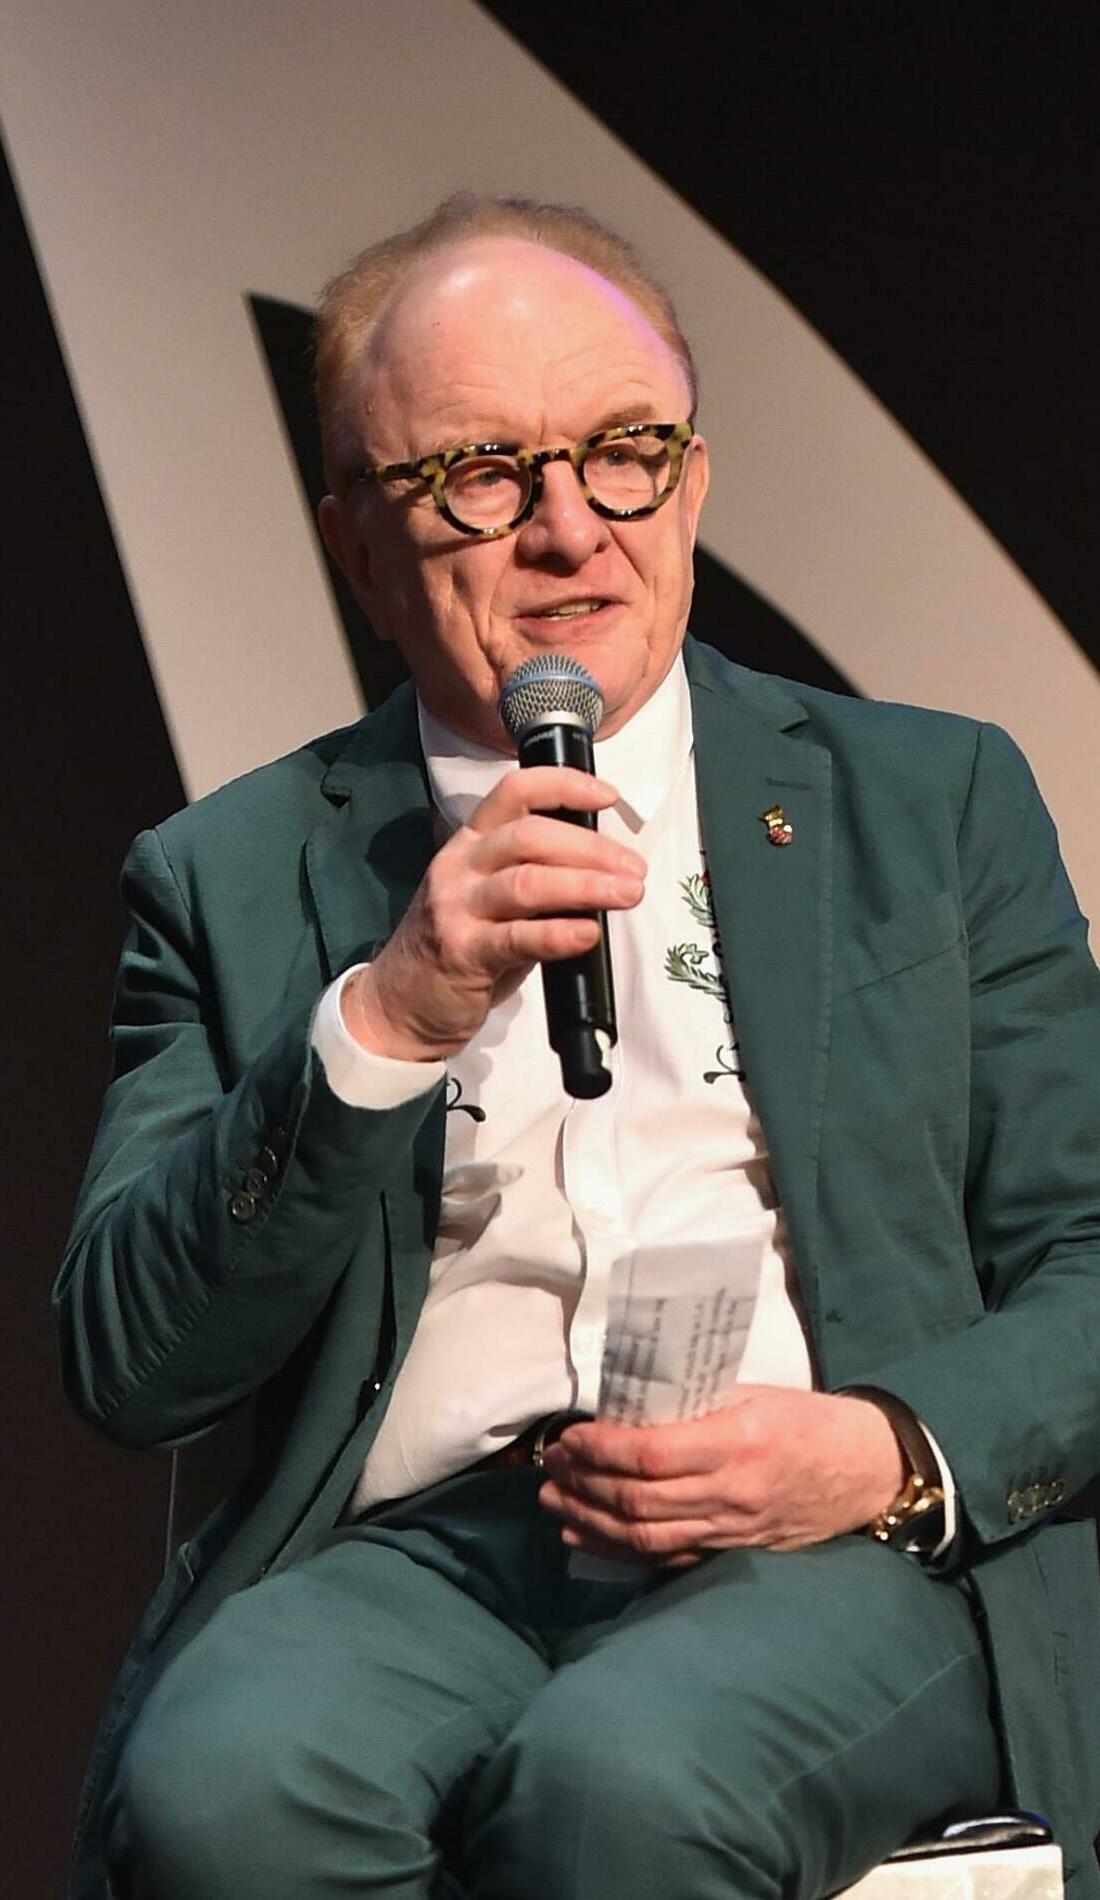 A Peter Asher live event